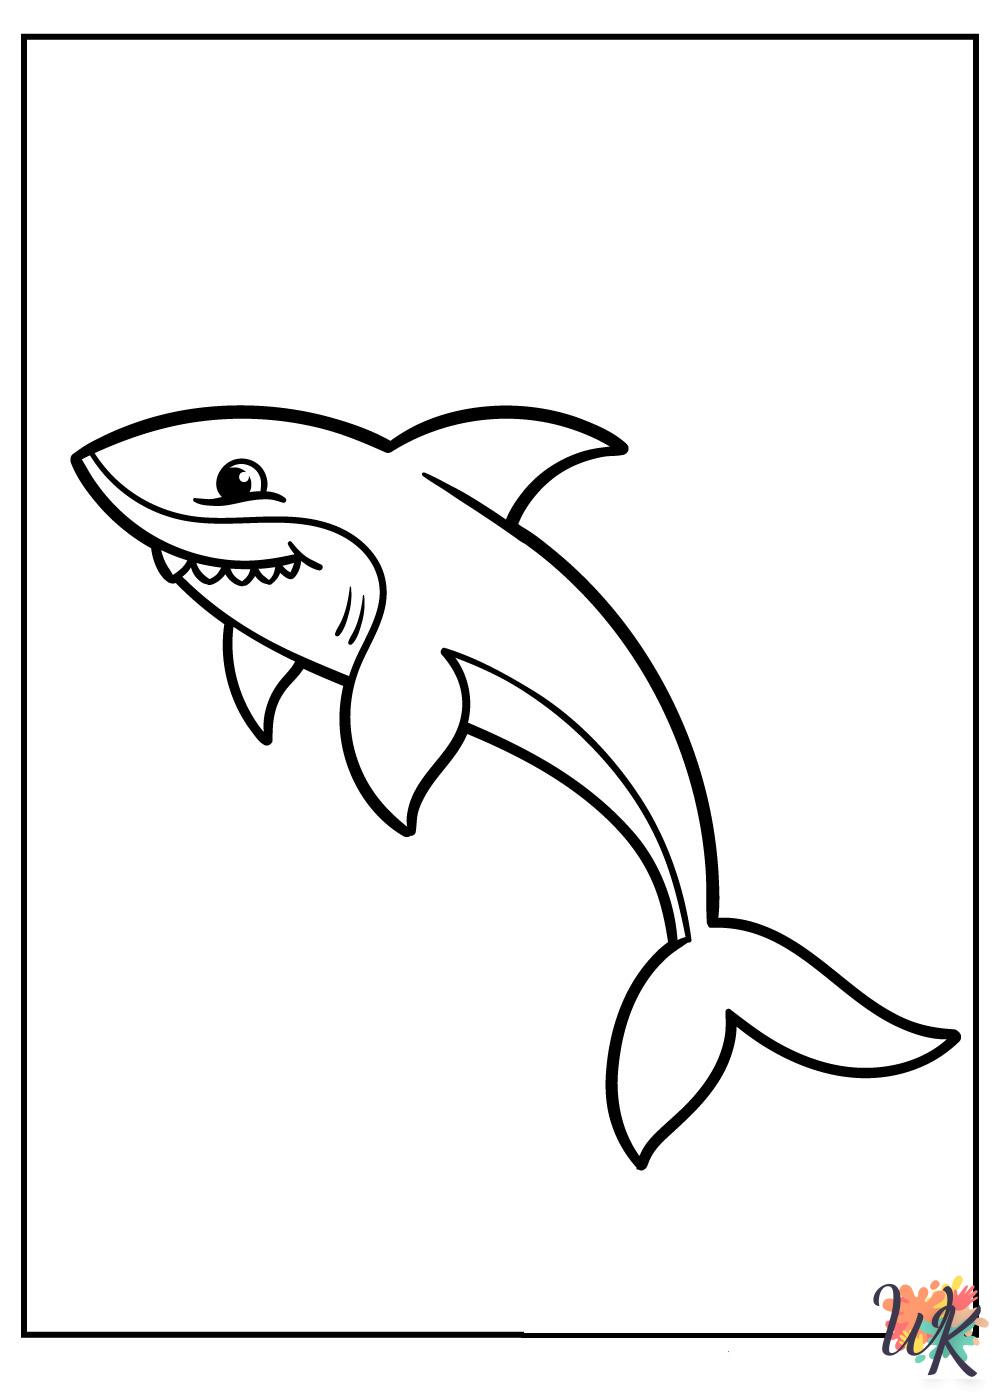 coloring pages printable Under The Sea